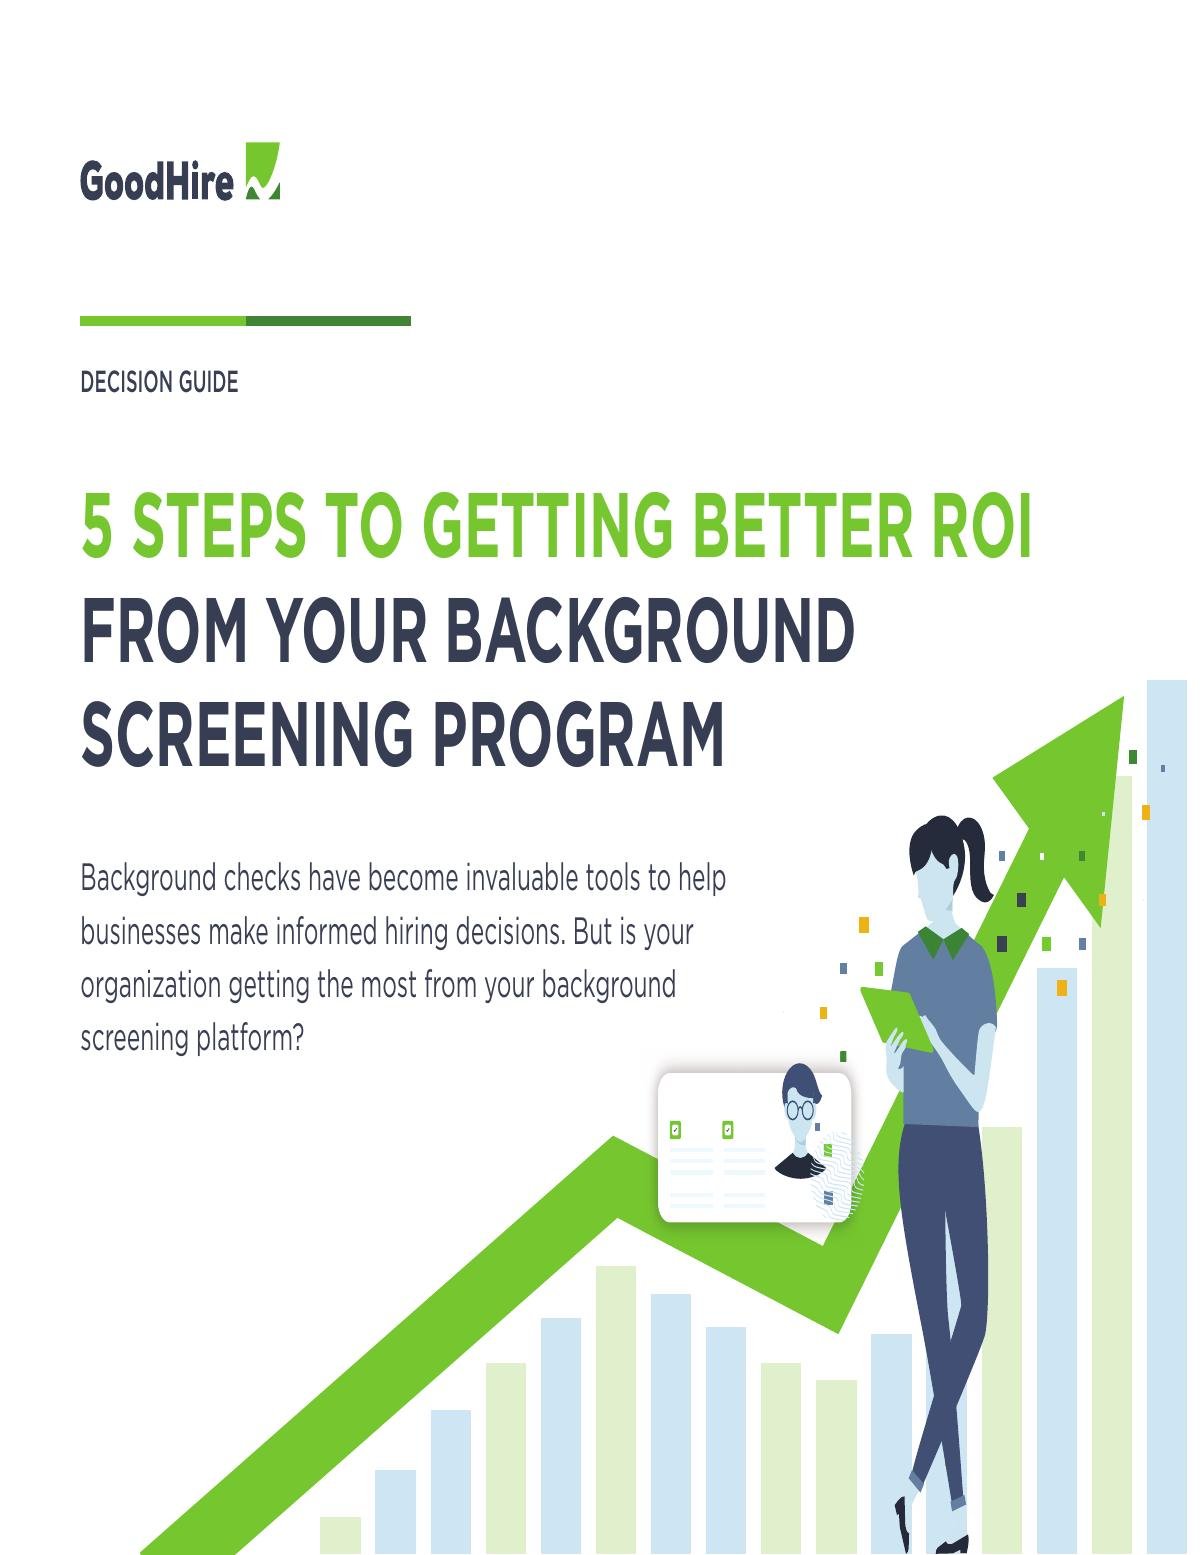 5 STEPS TO GETTING BETTER ROI From Your Background Screening Program